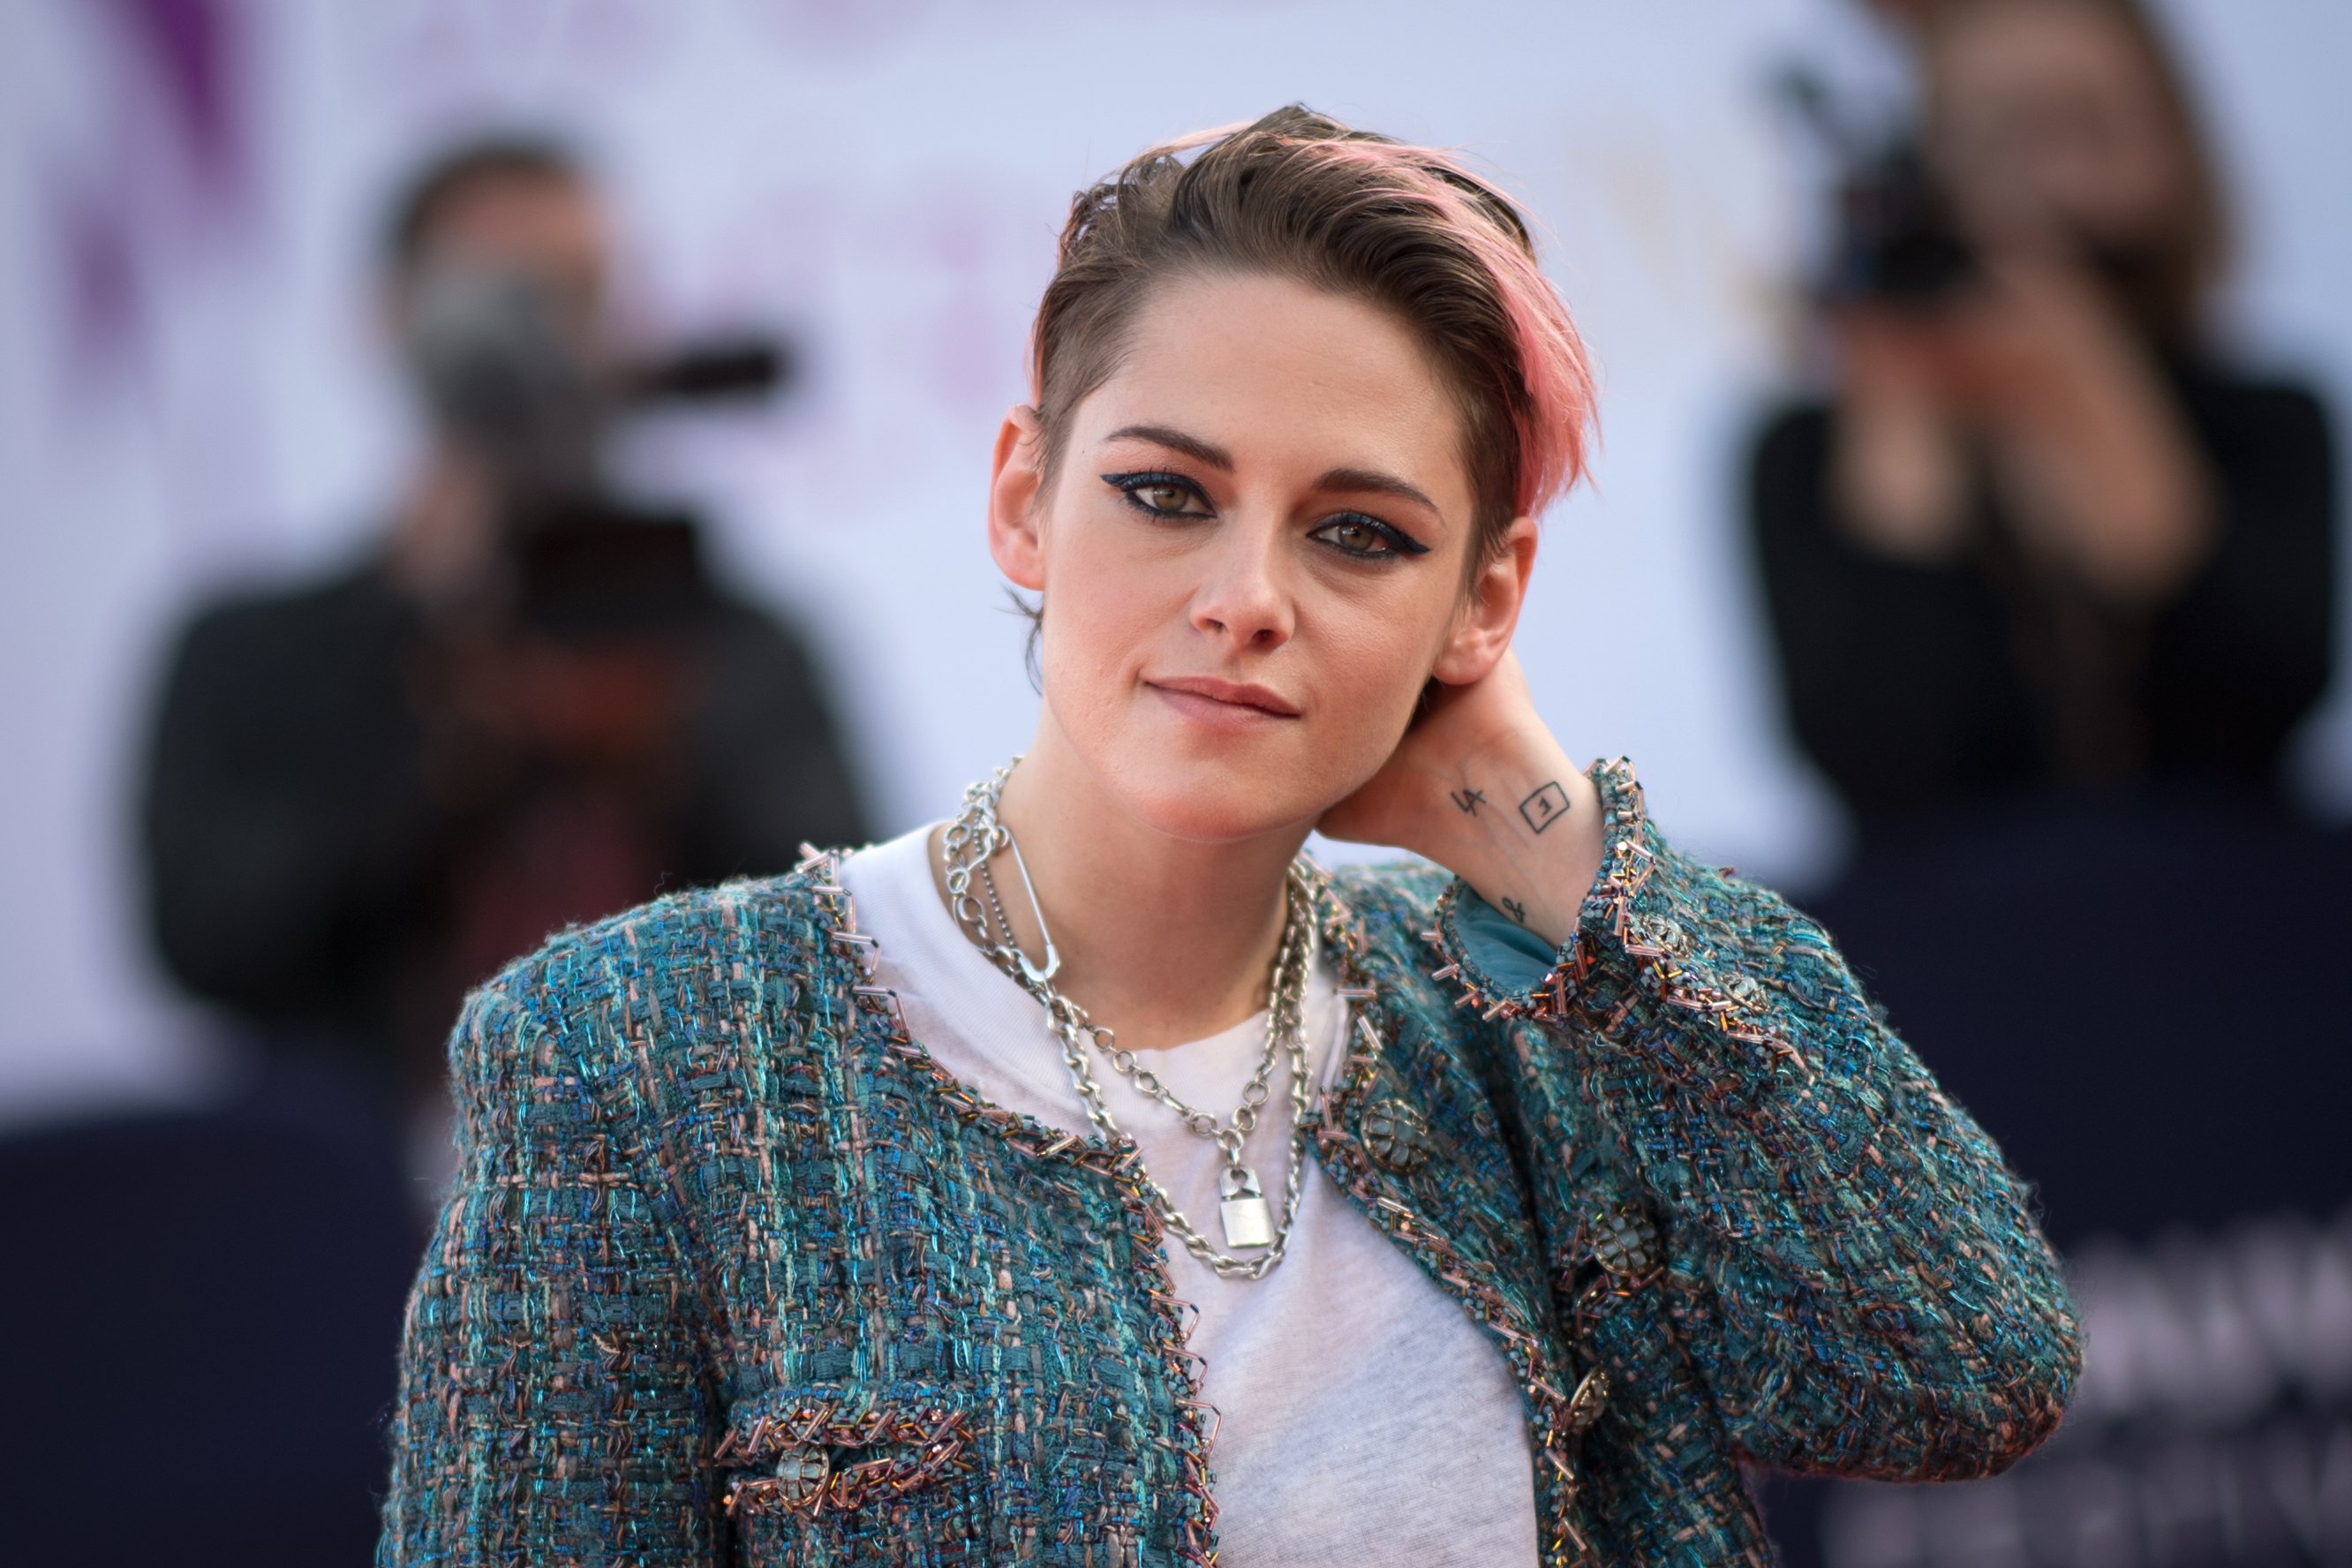 Kristen Stewart, star of the new Spencer movie as the late Princess Diana, tucks her hair back on the red carpet